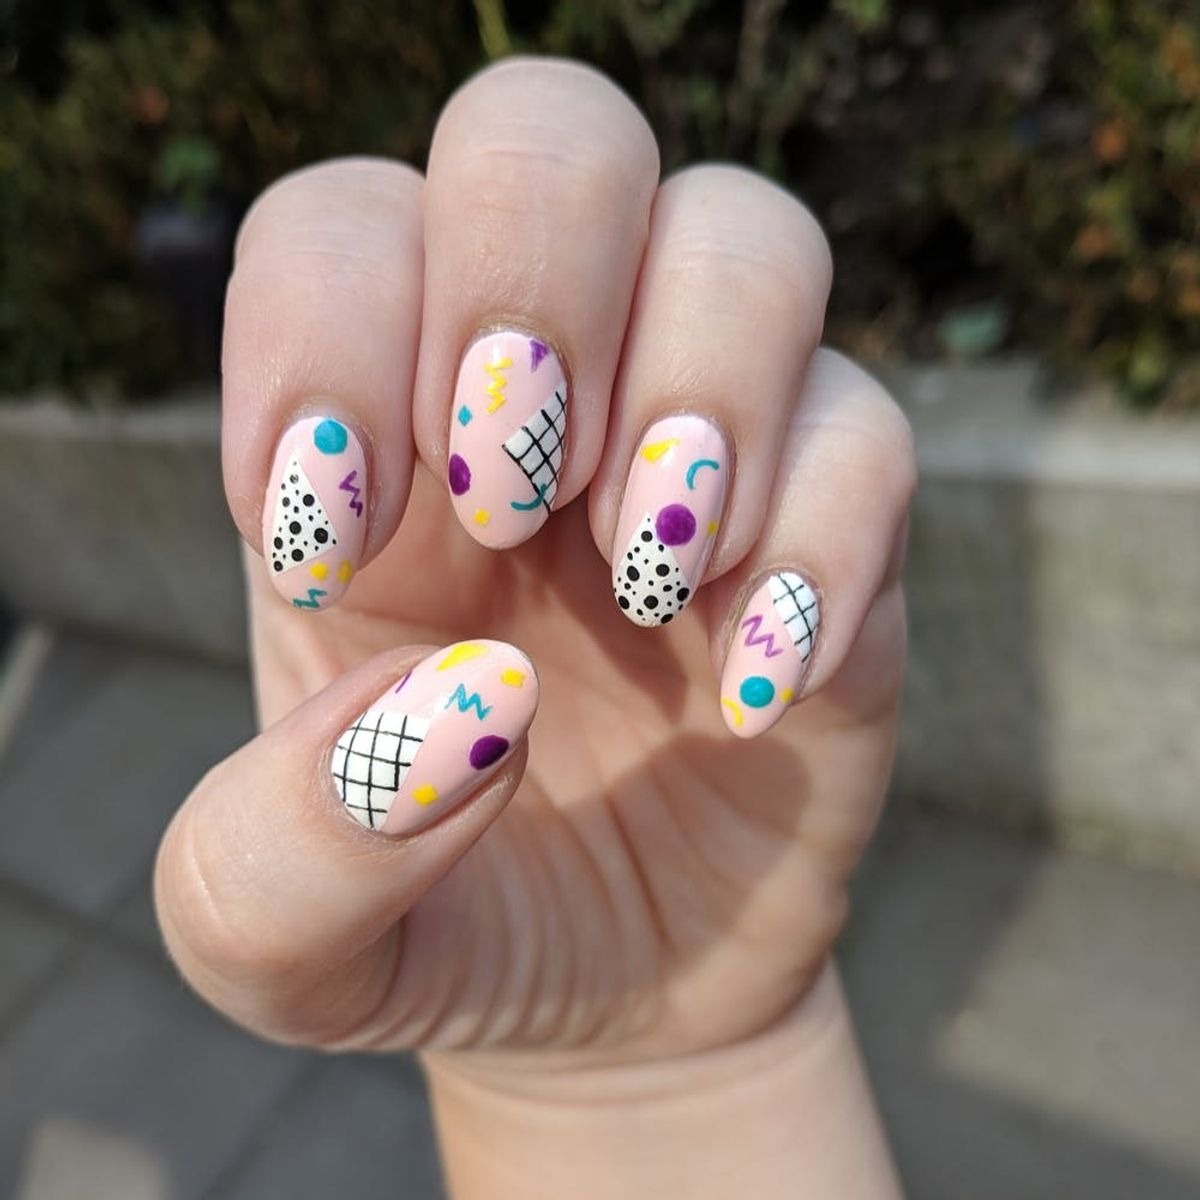 12 ’80s Nail Art Ideas to Round Out Your End-of-Summer Style